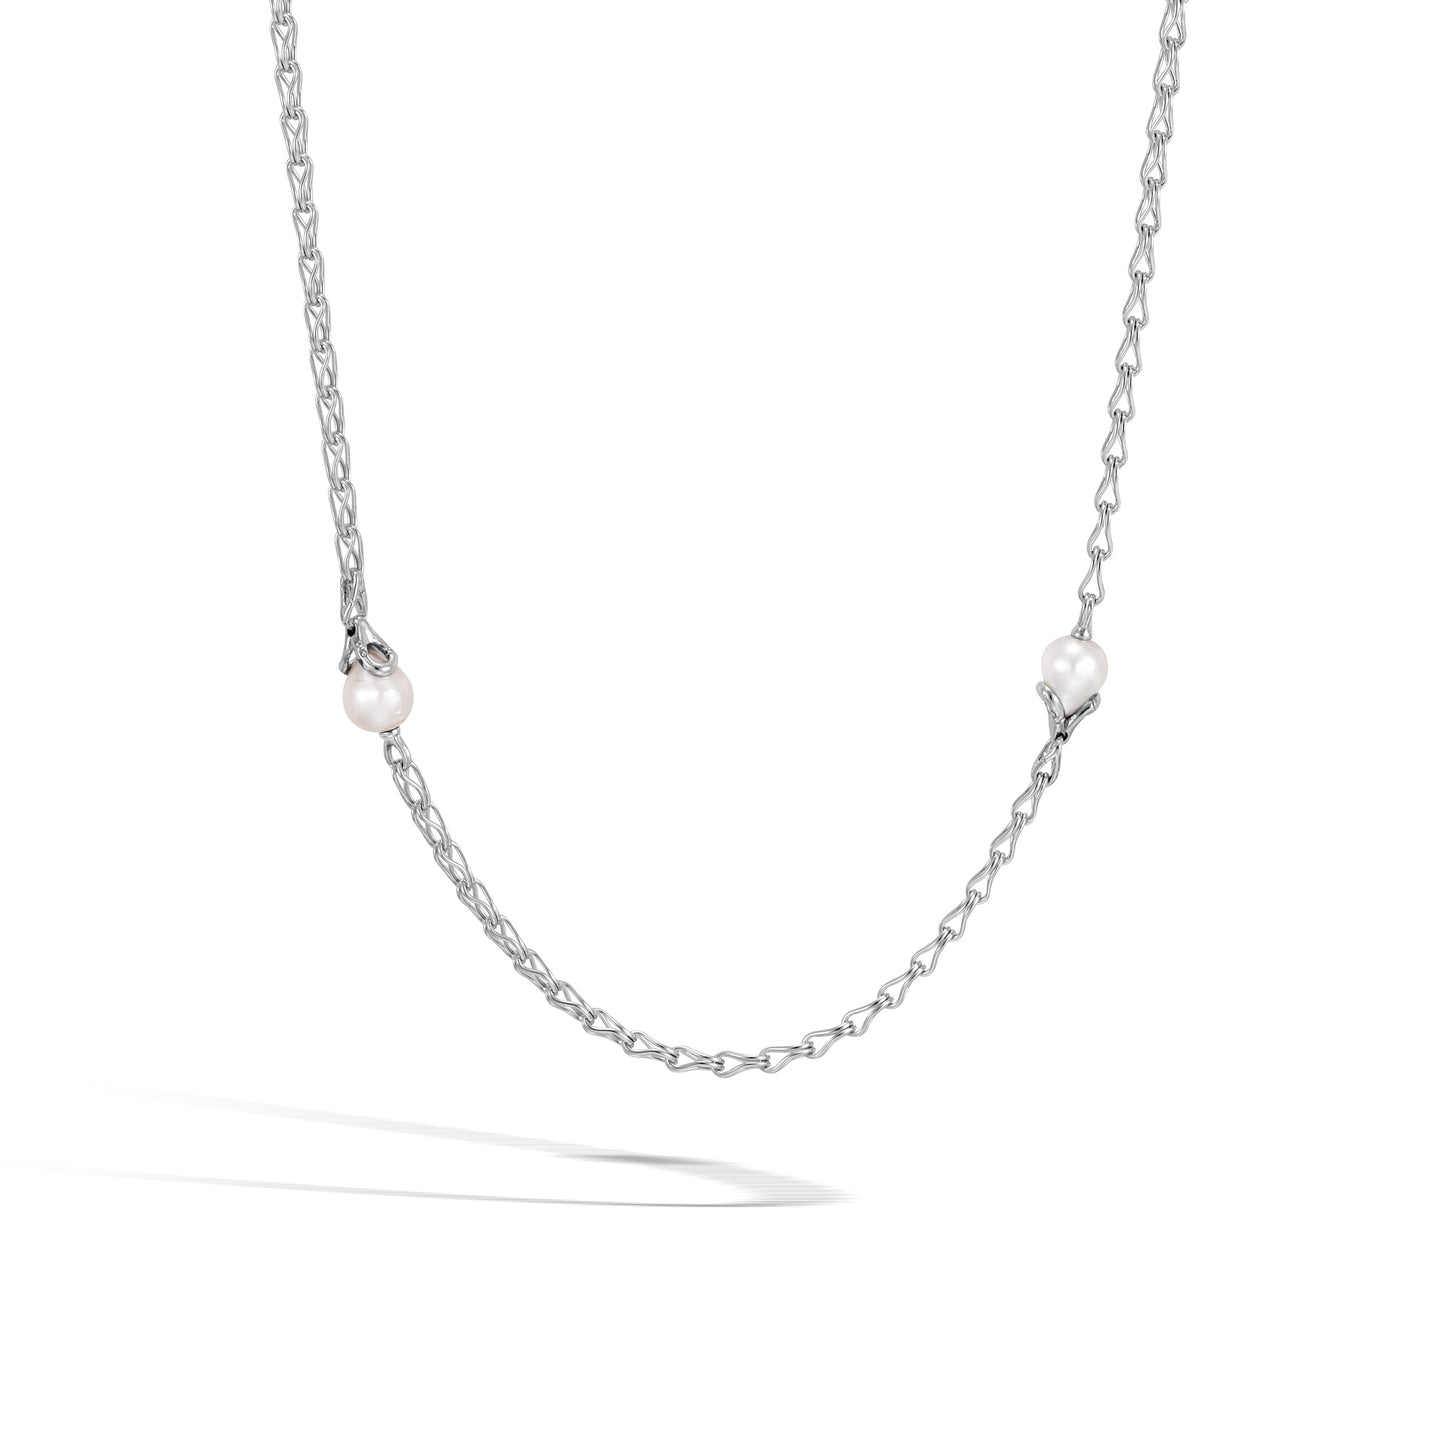 Station Necklace with White Fresh Water Pearl